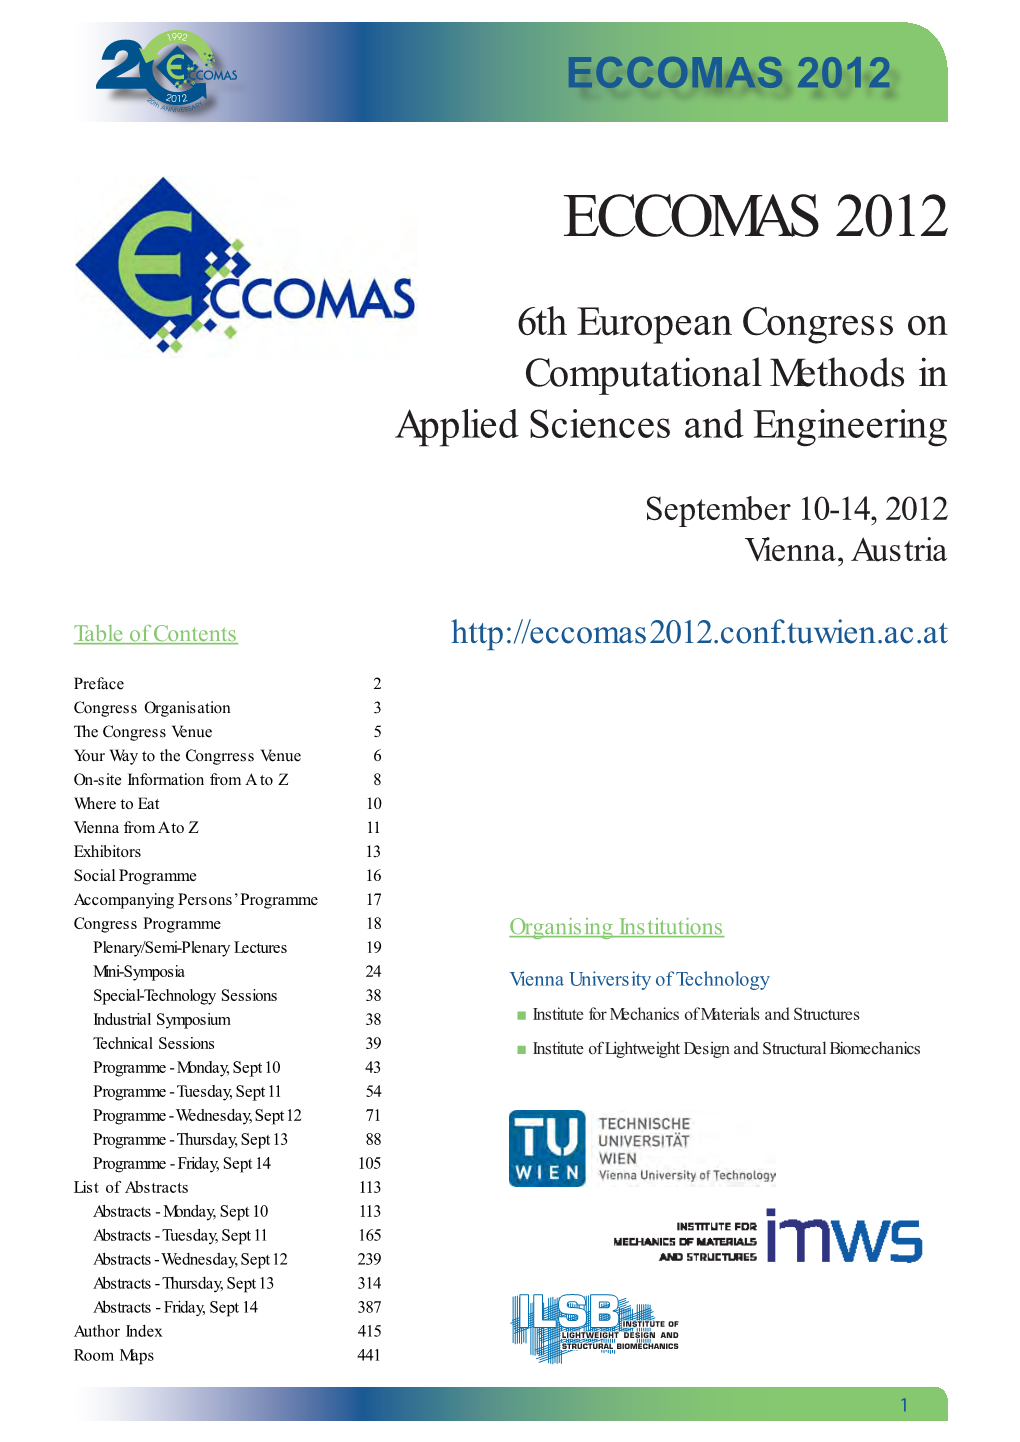 6Th European Congress on Computational Methods in Applied Sciences and Engineering